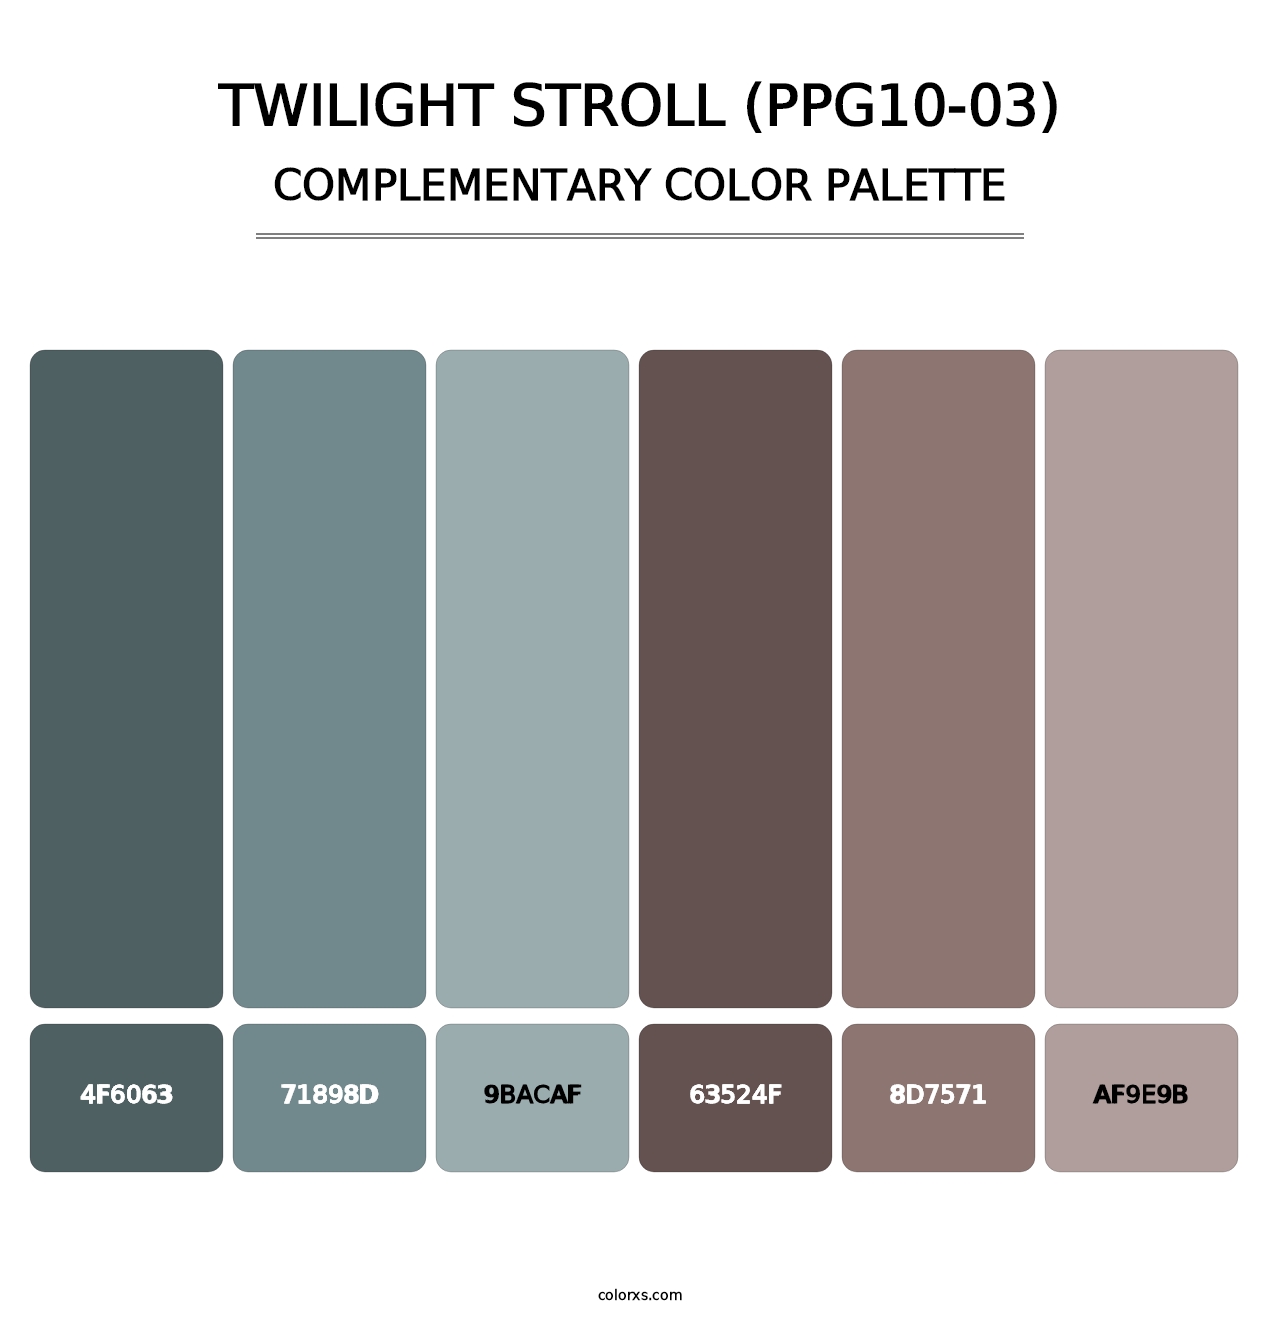 Twilight Stroll (PPG10-03) - Complementary Color Palette